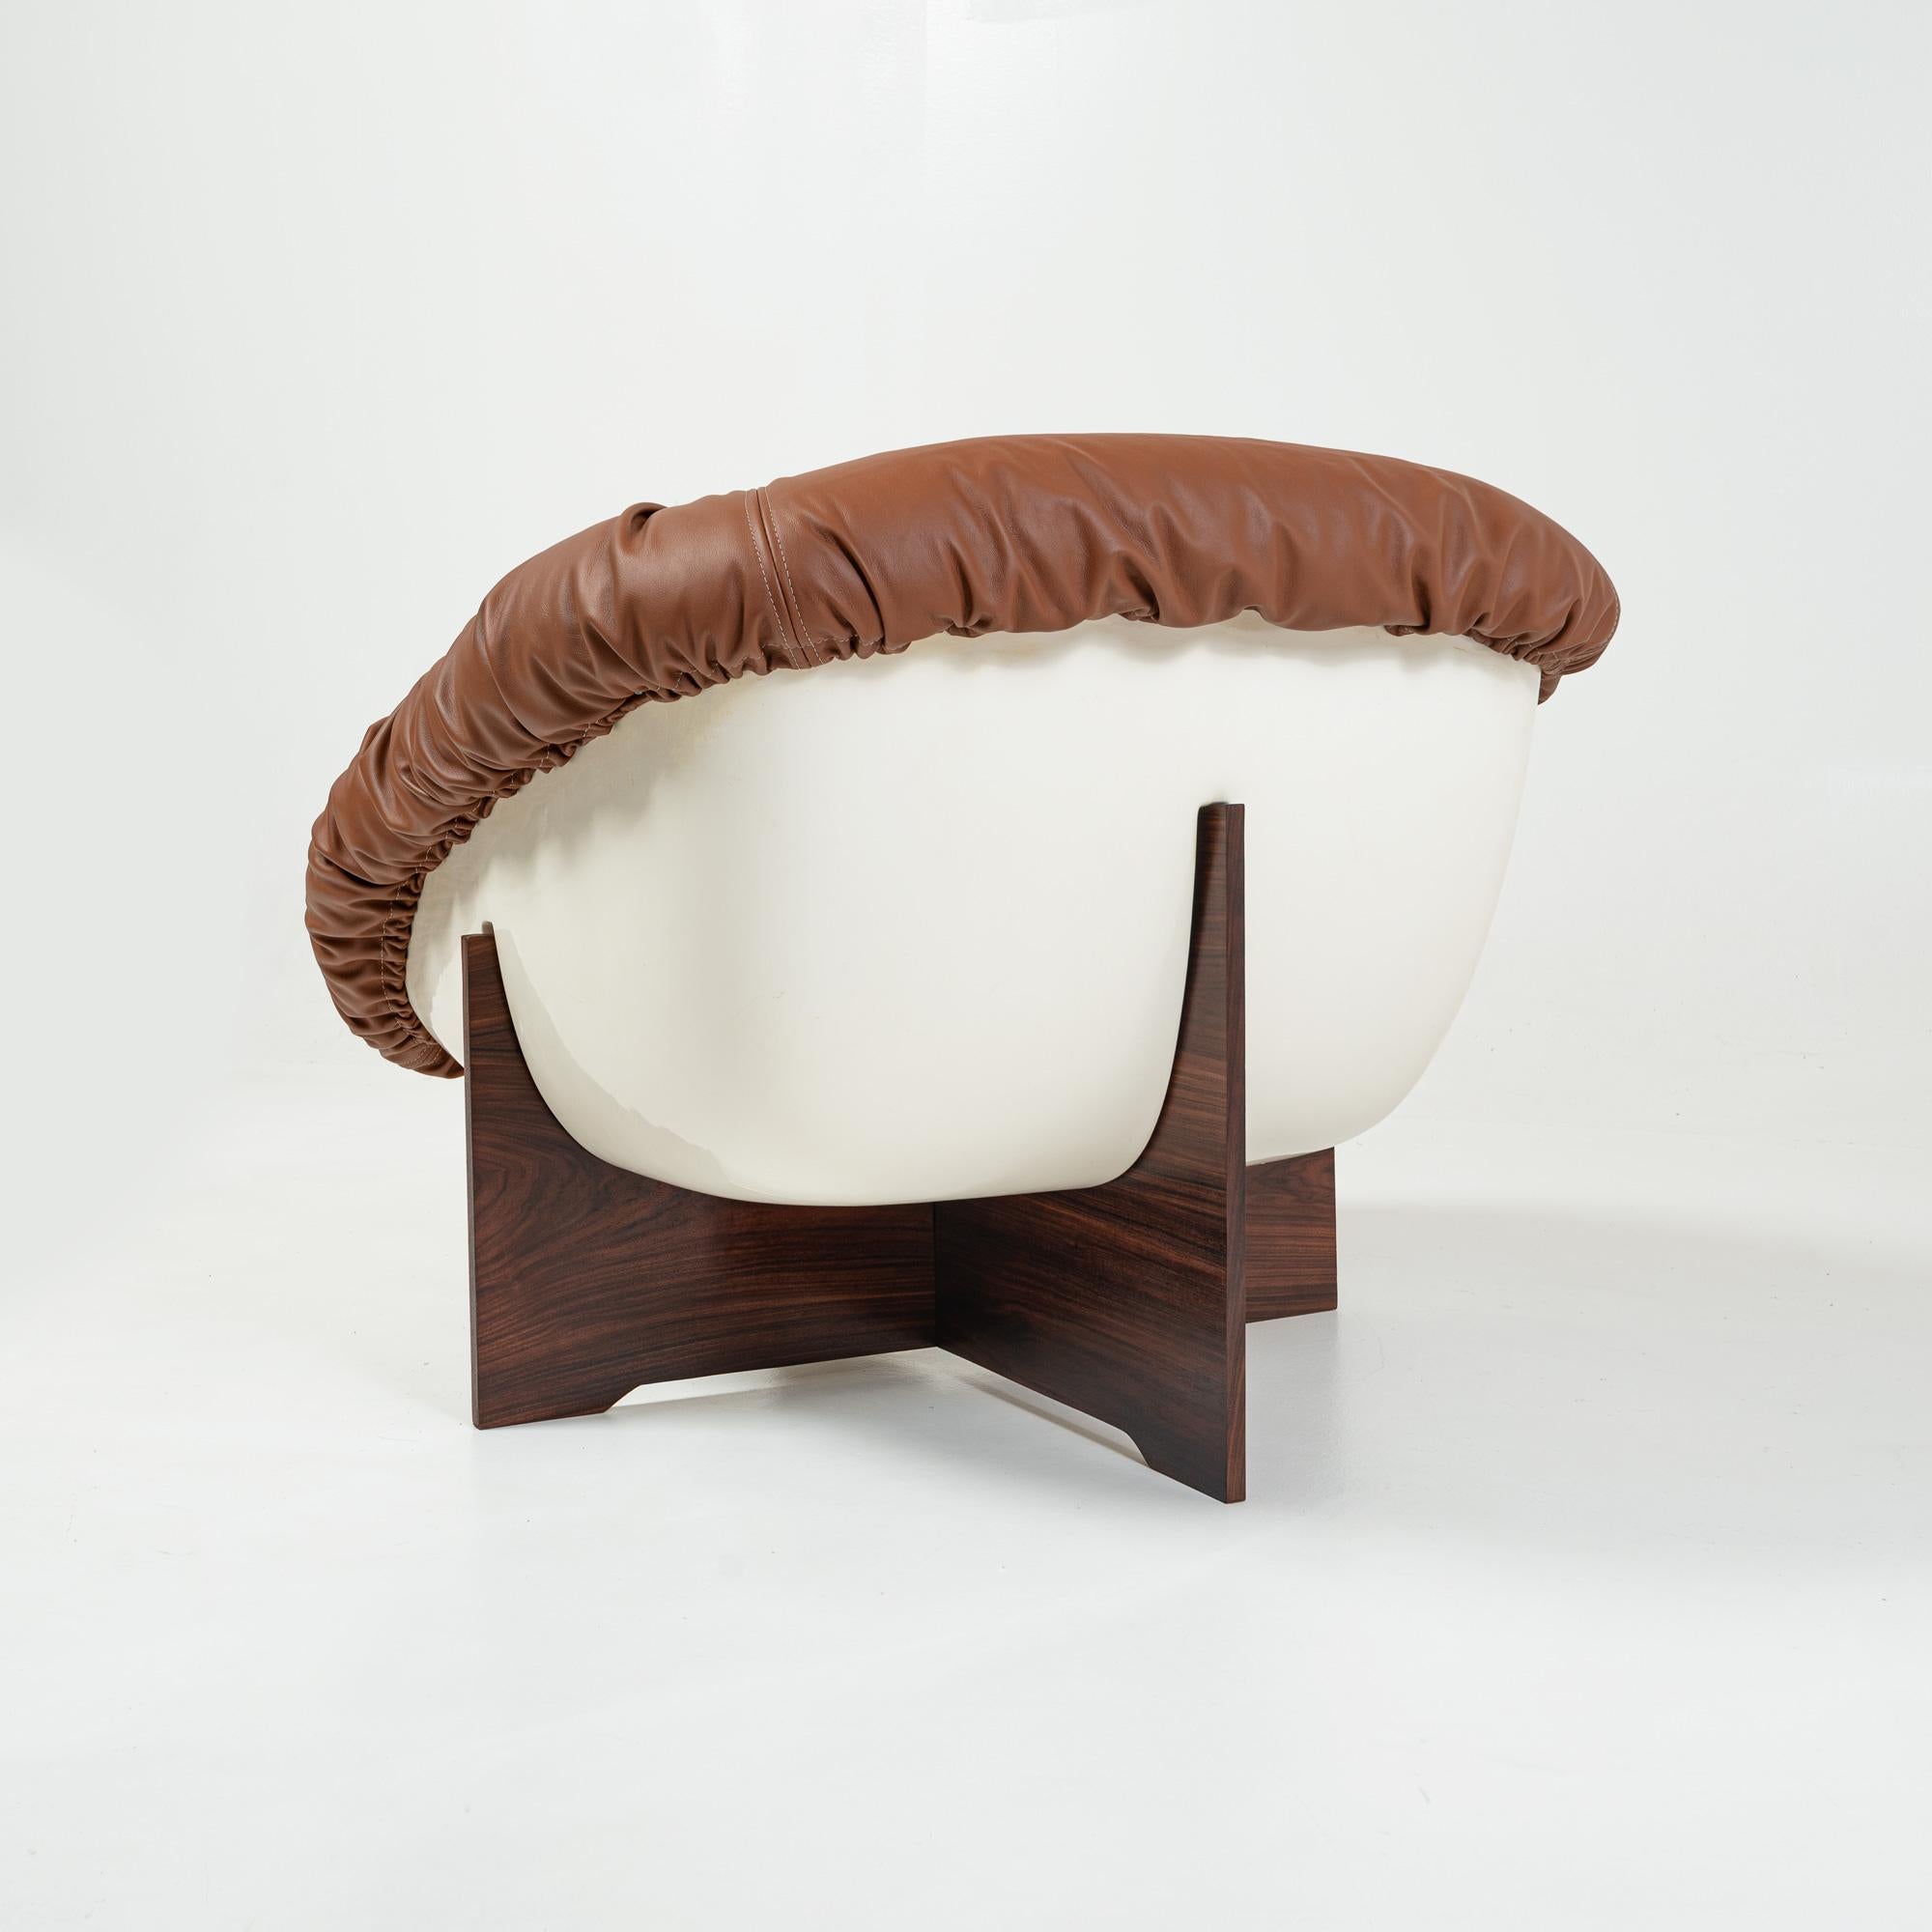 Late 20th Century Percival Lafer's Lounge Chair model MP-61 in Maharam Leather and Rosewood, 1973 For Sale